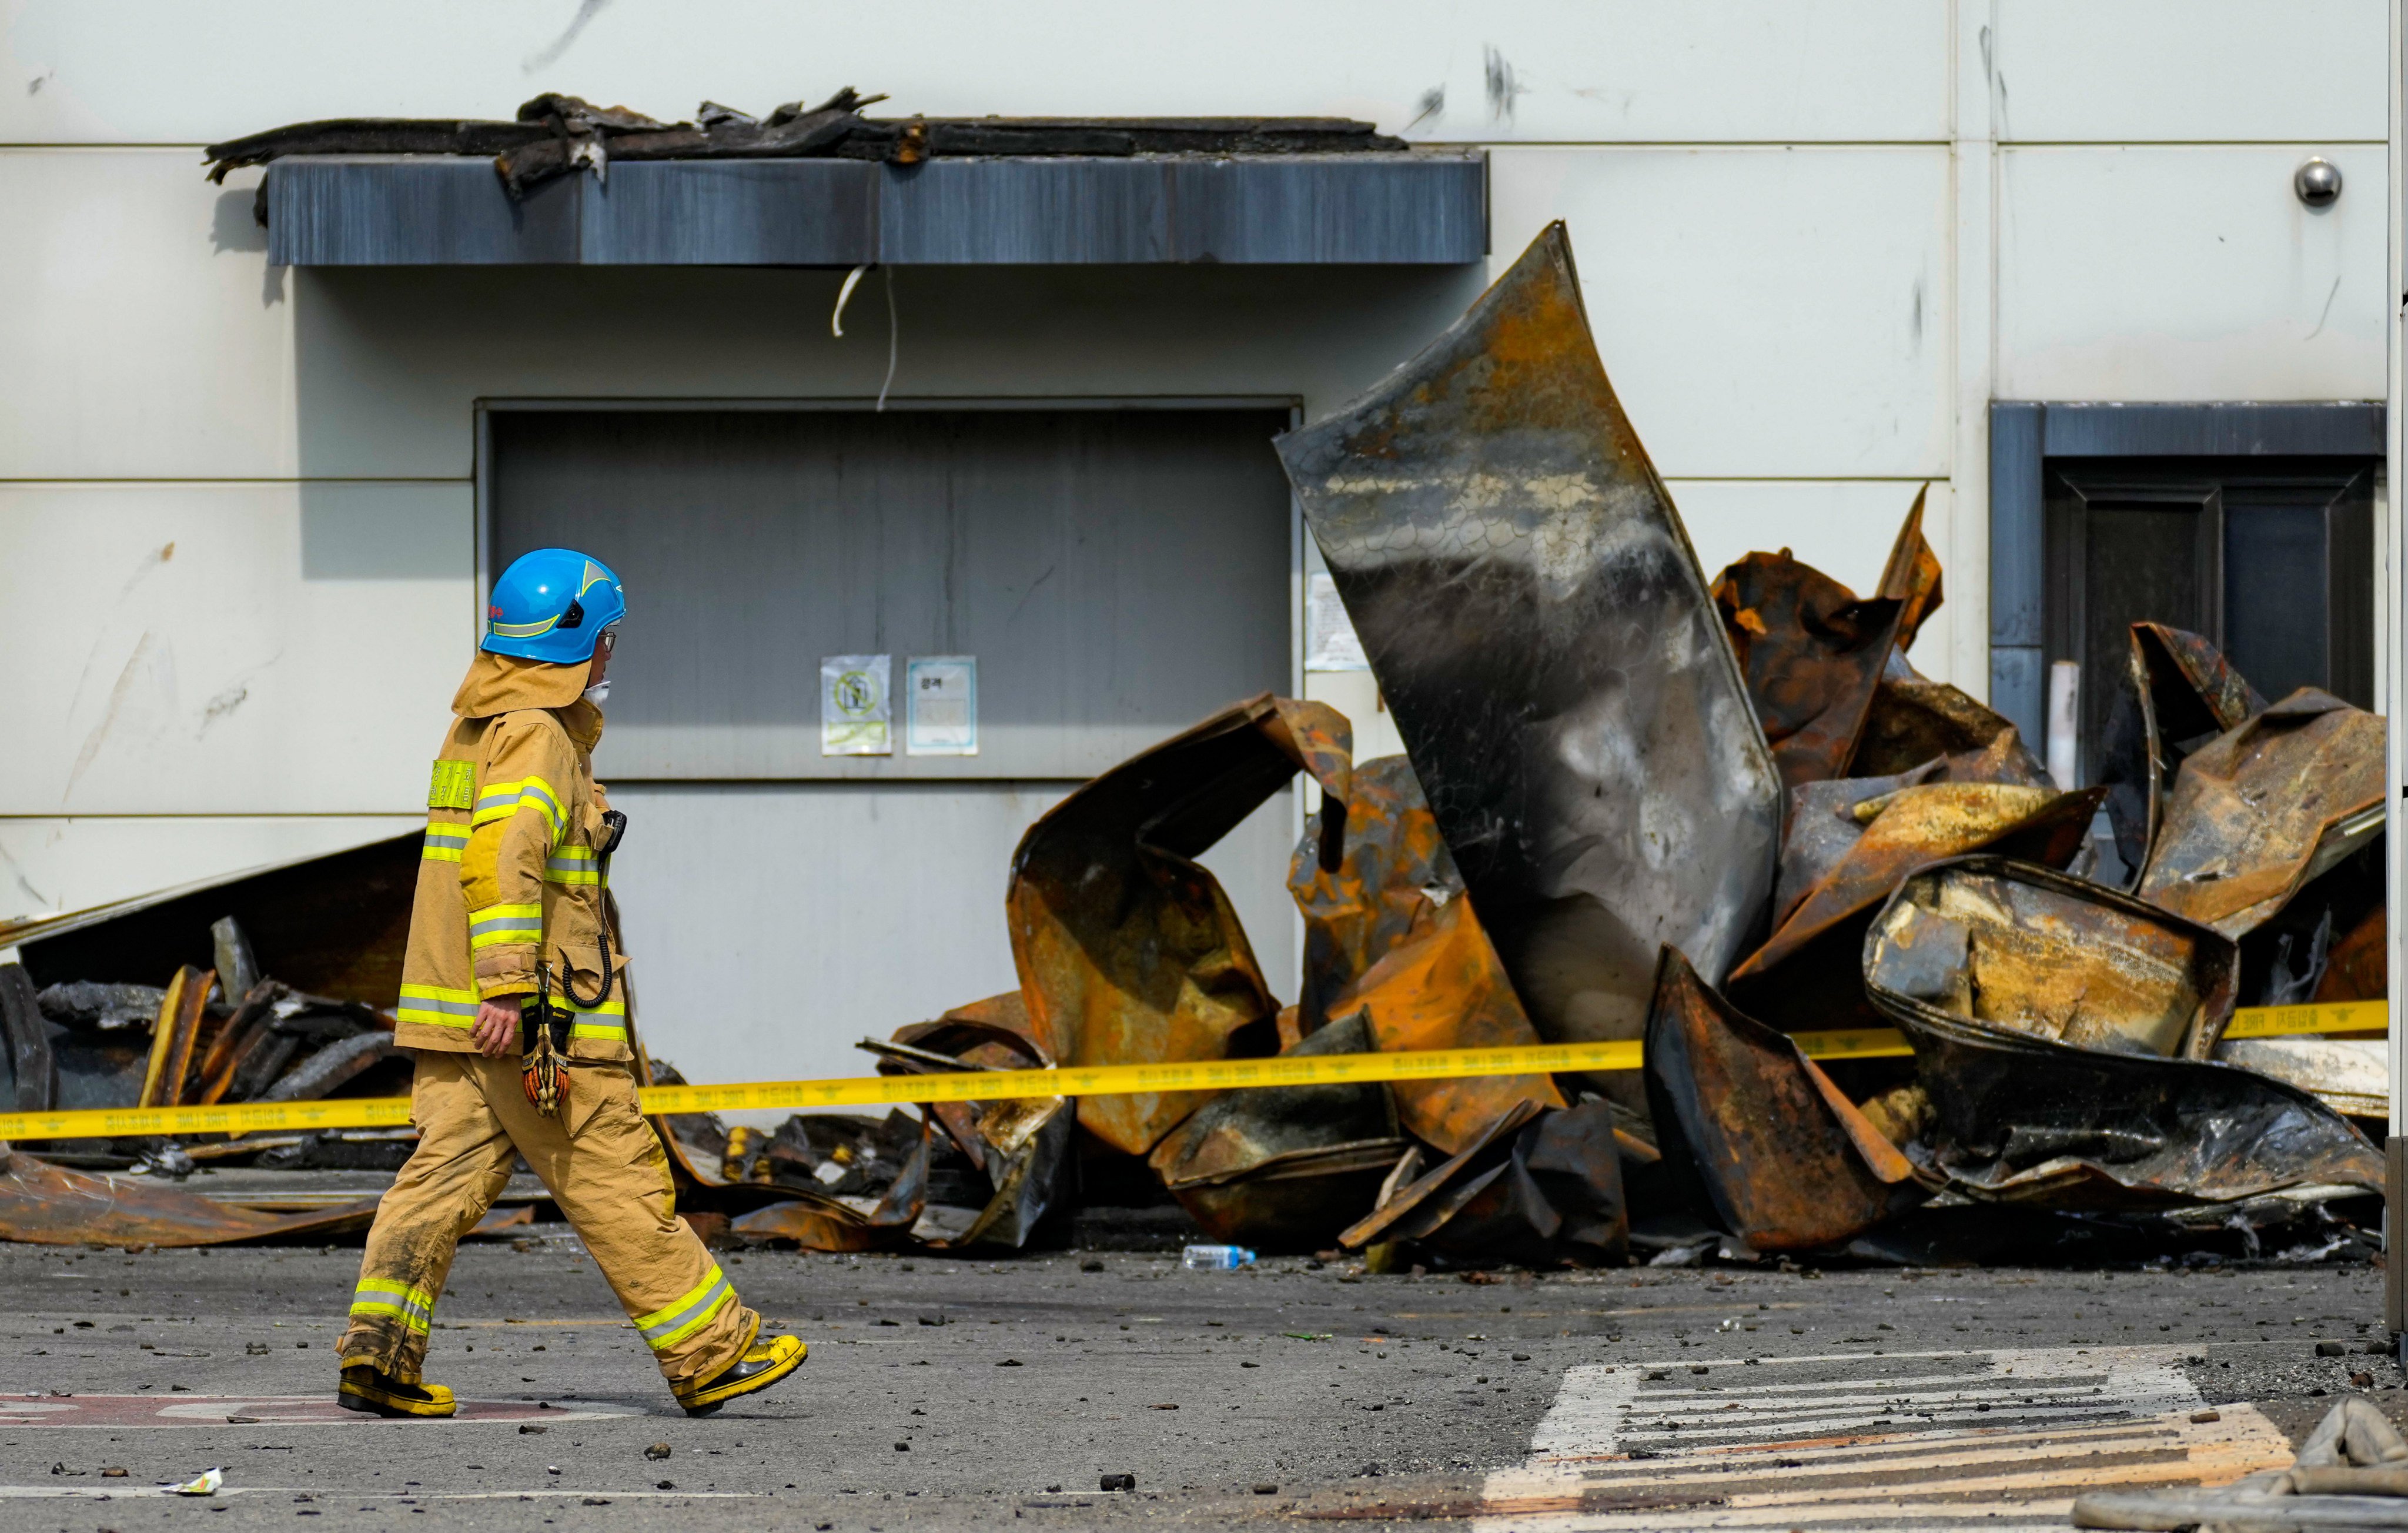 A firefighter walks near the debris at the site of a burnt lithium battery manufacturing factory in Hwaseong, South Korea, on June 25 after an explosion killed 22 people. Photo: AP